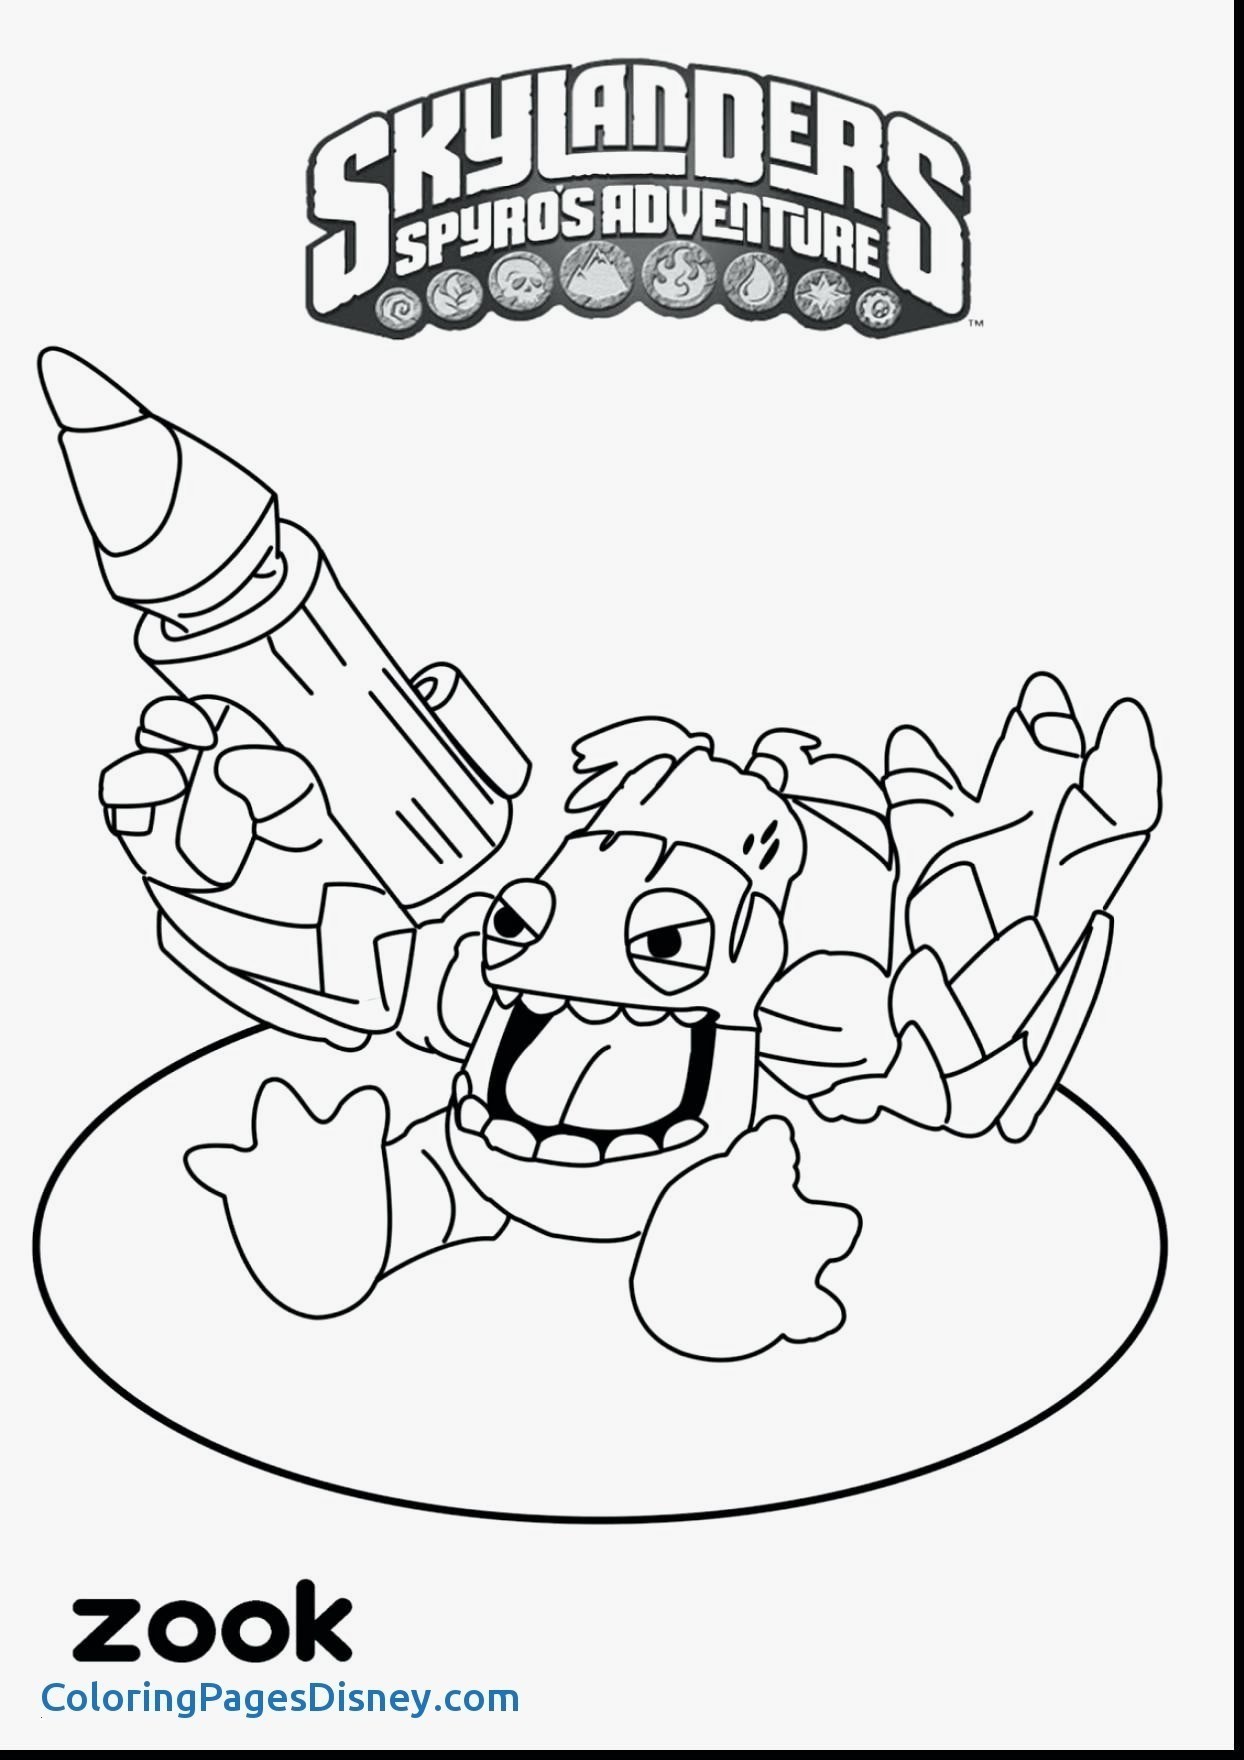 Disney Coloring Pages line Fresh Line Coloring Book Disney Heathermarxgallery bird coloring pages online